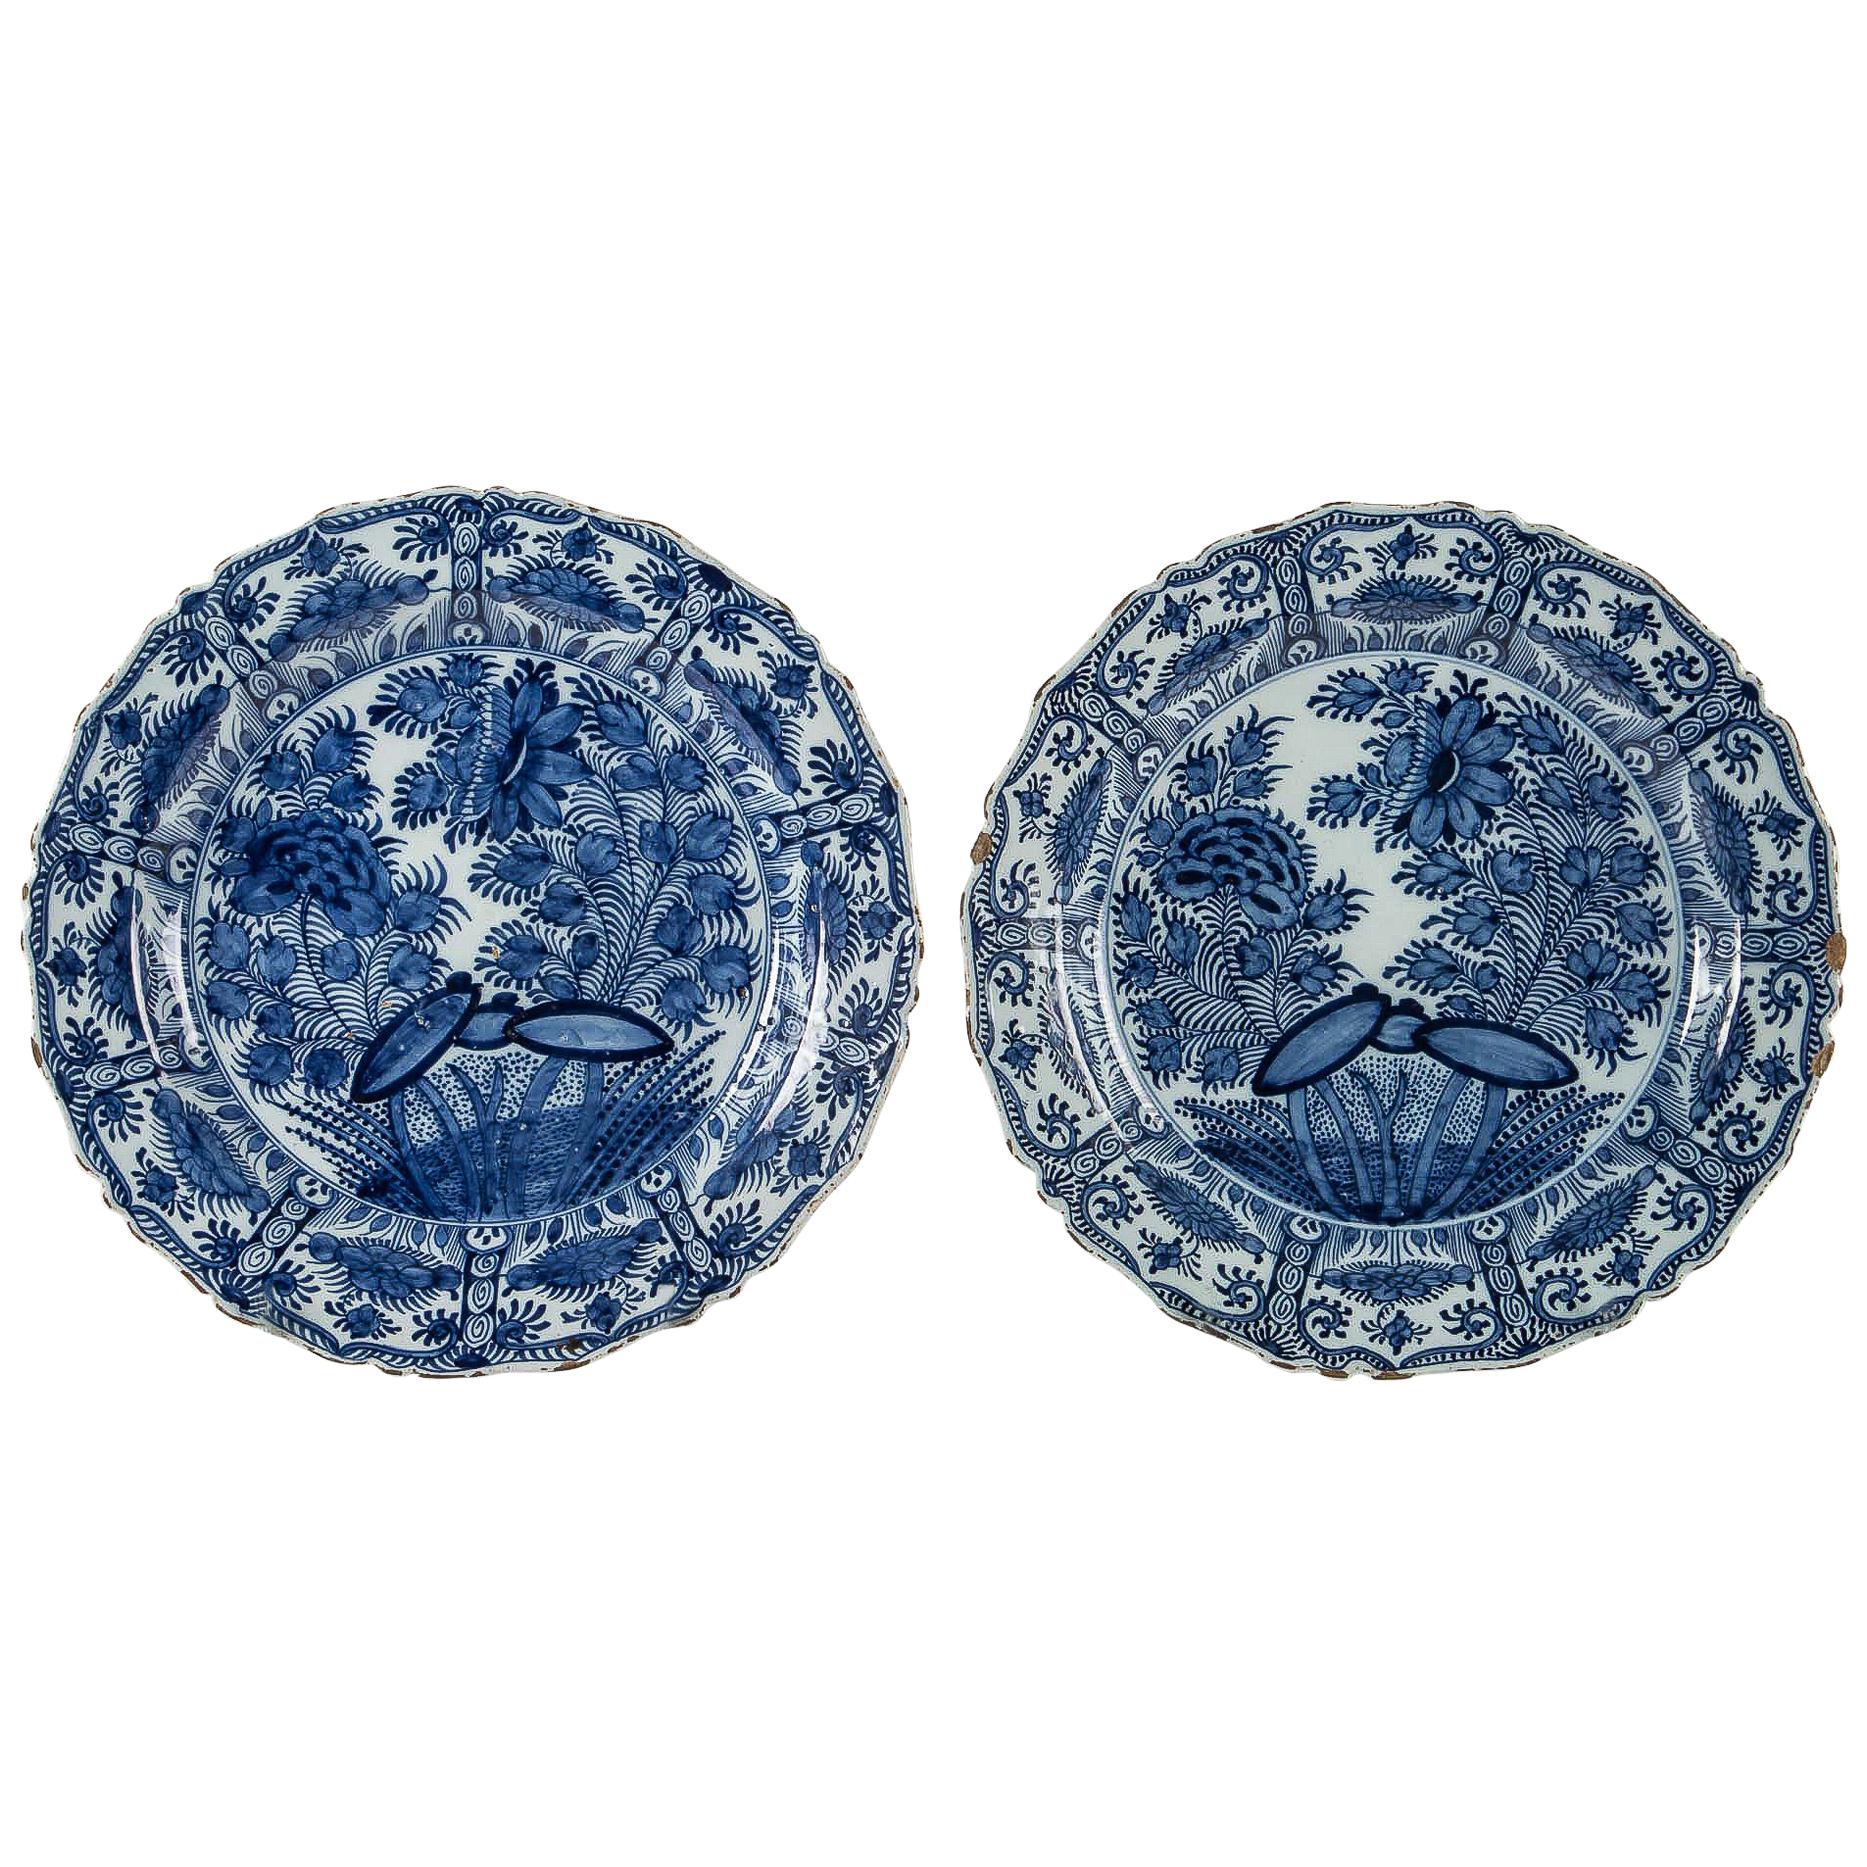 18th Century, Rare Pair of Faience Delft Round Dishes by Ax Porcelain Factory For Sale